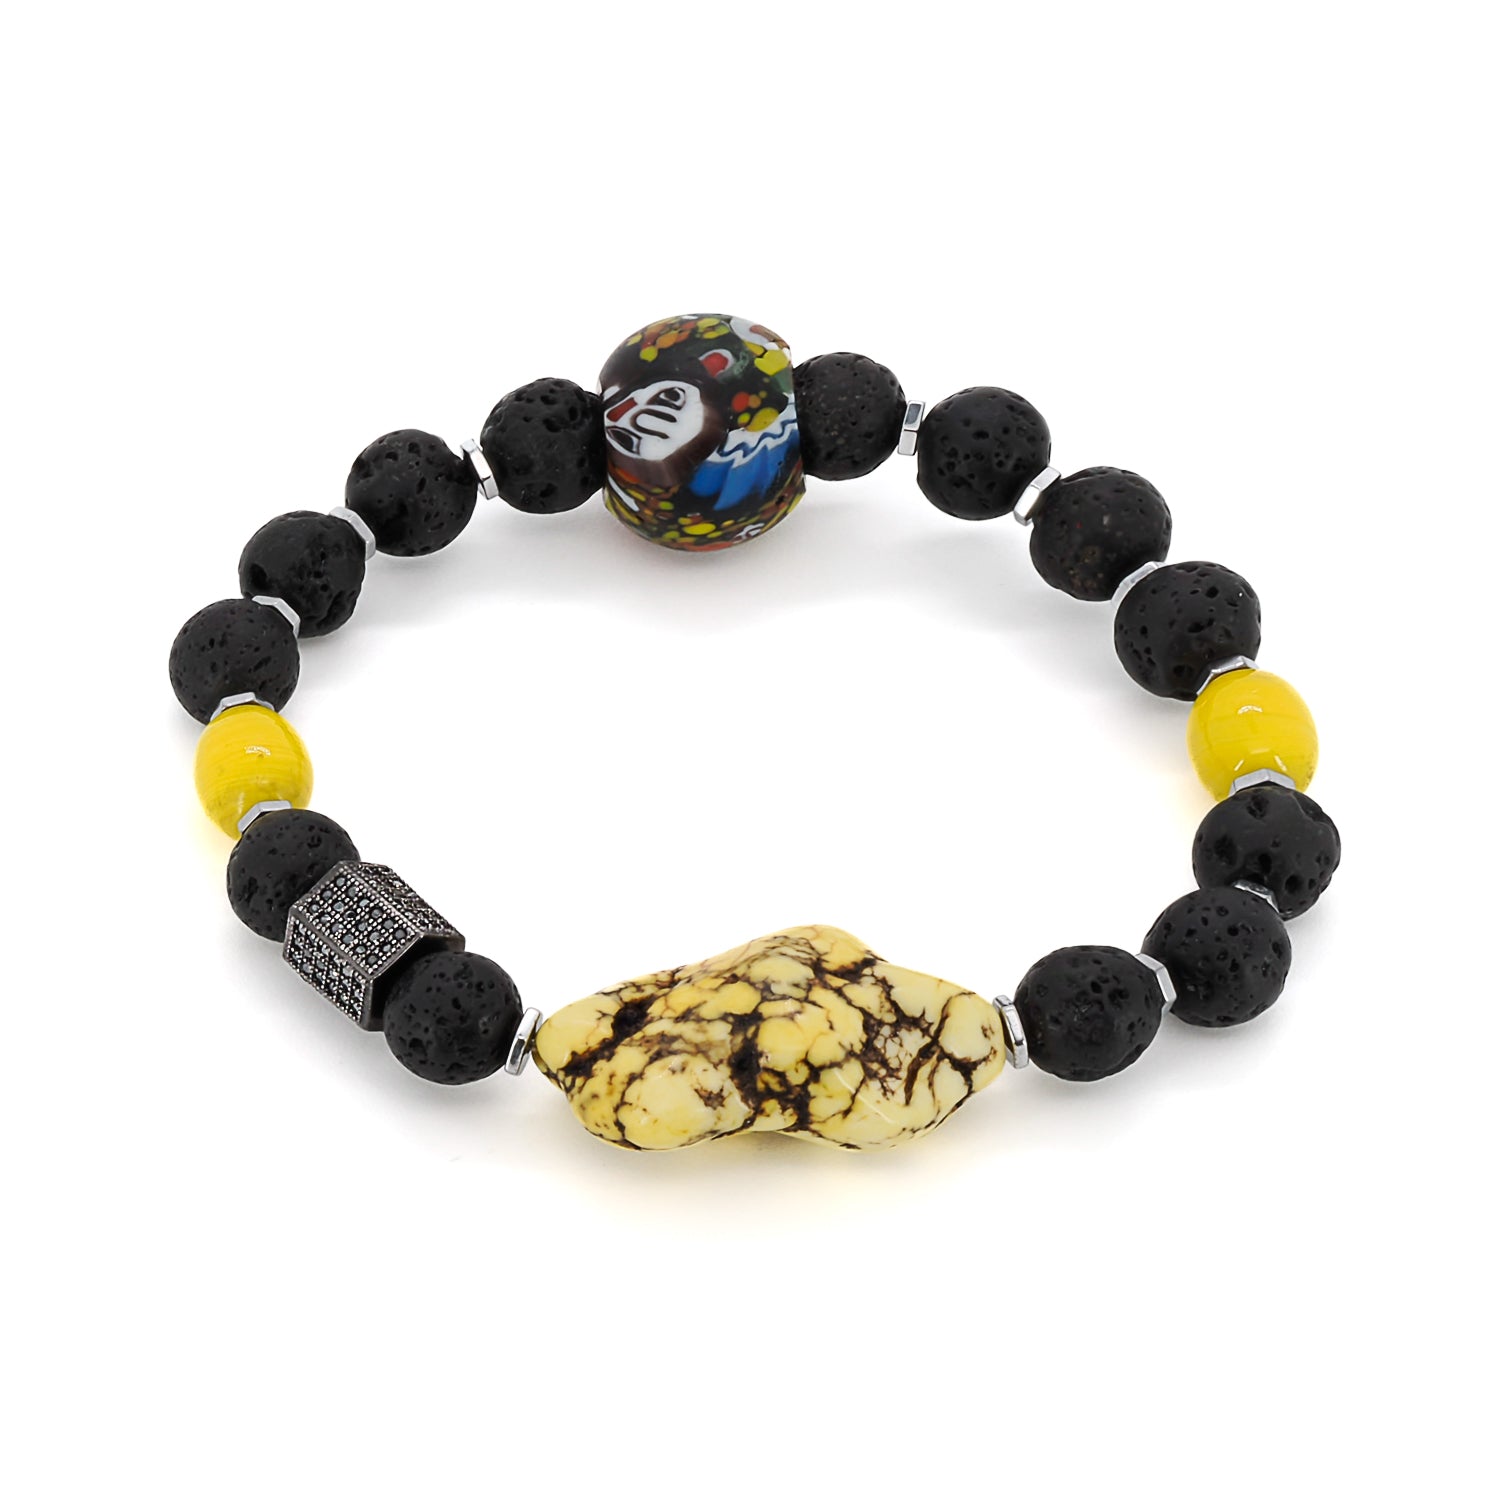 African Yellow Turquoise Bracelet featuring a combination of black lava rock stones, yellow African beads, silver hematite stone spacers, and a raw yellow turquoise large bead as the focal point.